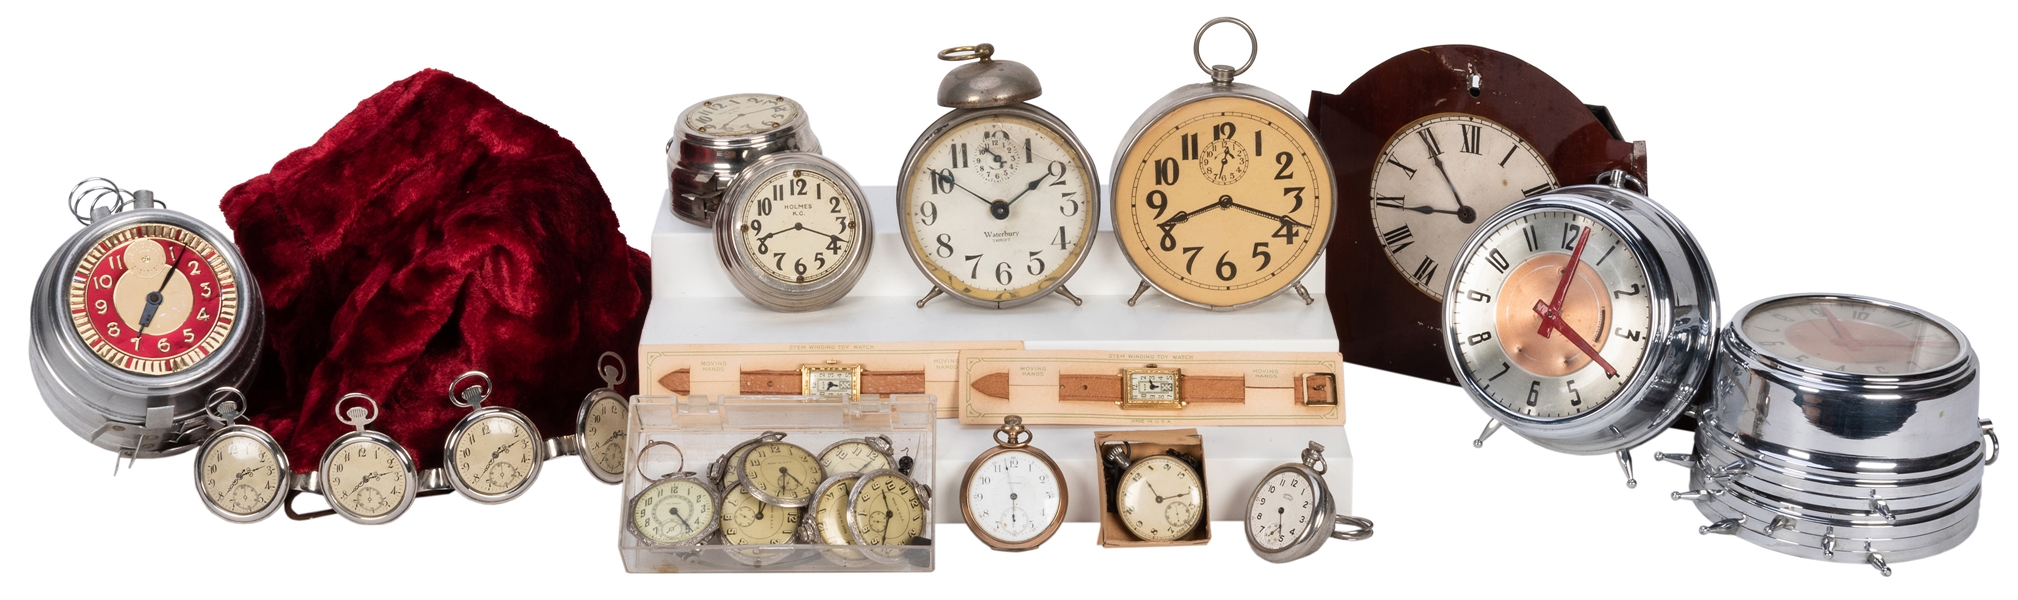 Collection of Trick Alarm Clocks and Pocket Watches.